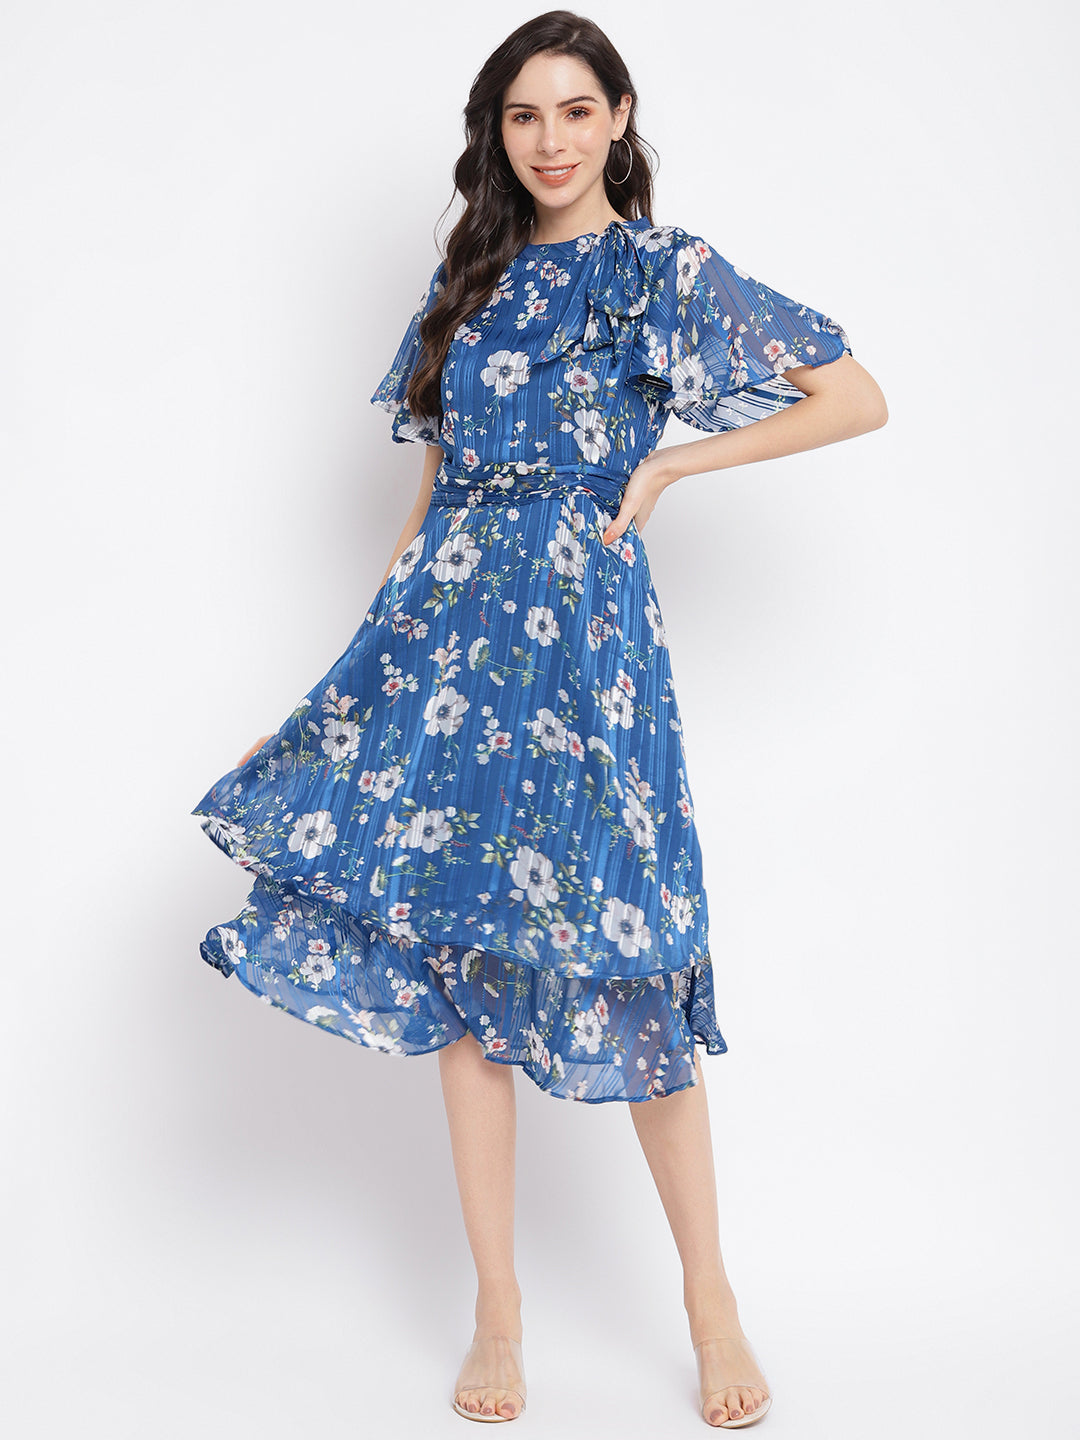 Teal Floral Printed Cap Sleeves Layered Fit & Flare Dress With Tie Up Neck